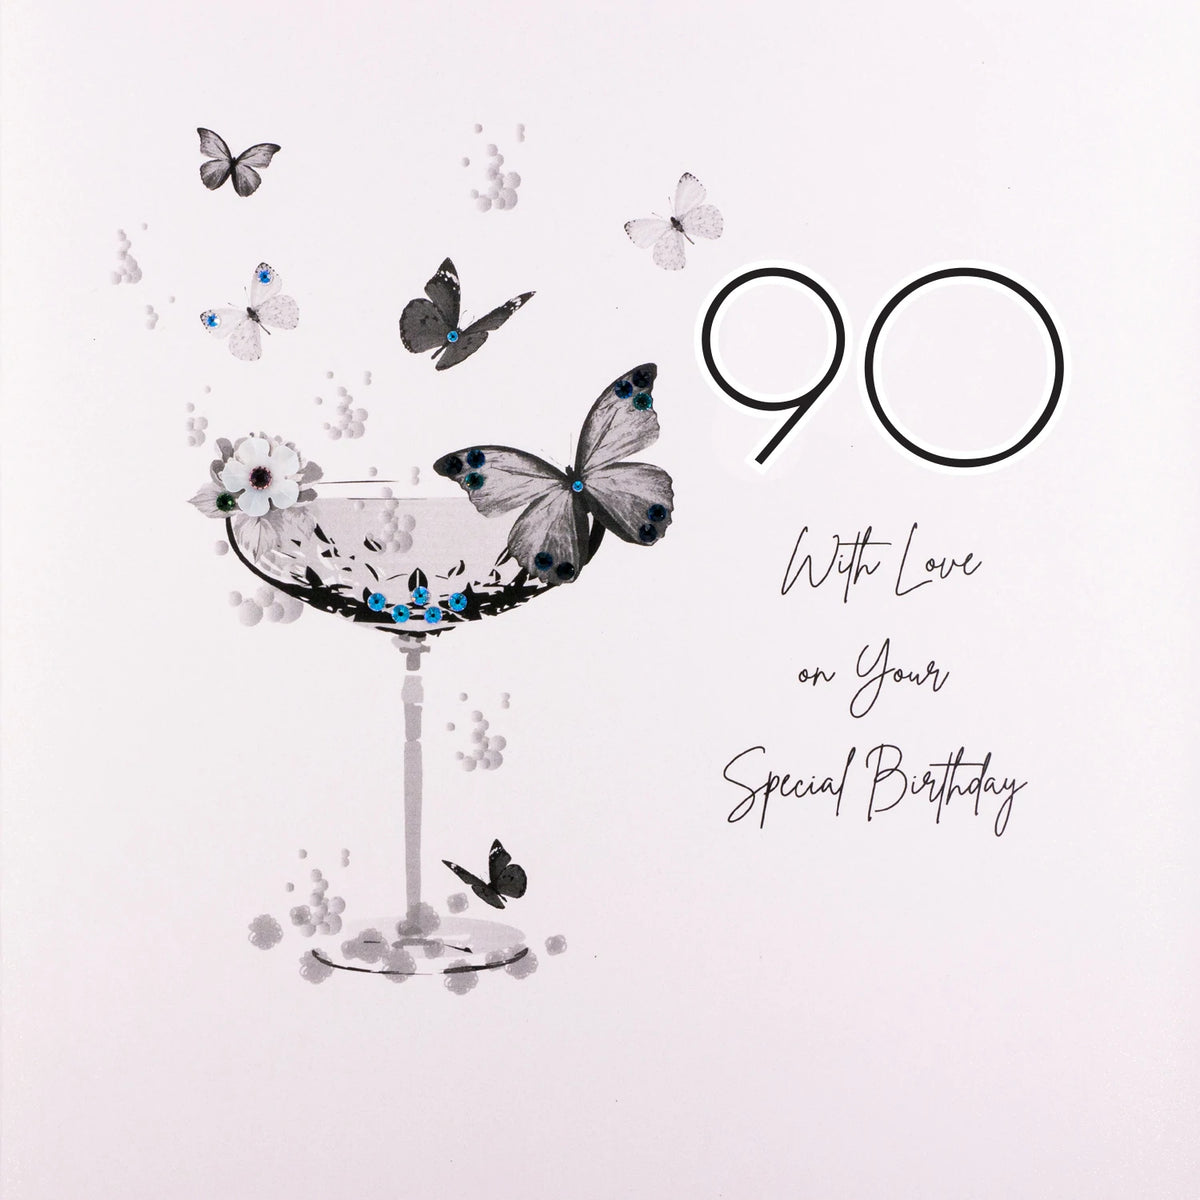 90 With Love On Your Very Special Birthday Card